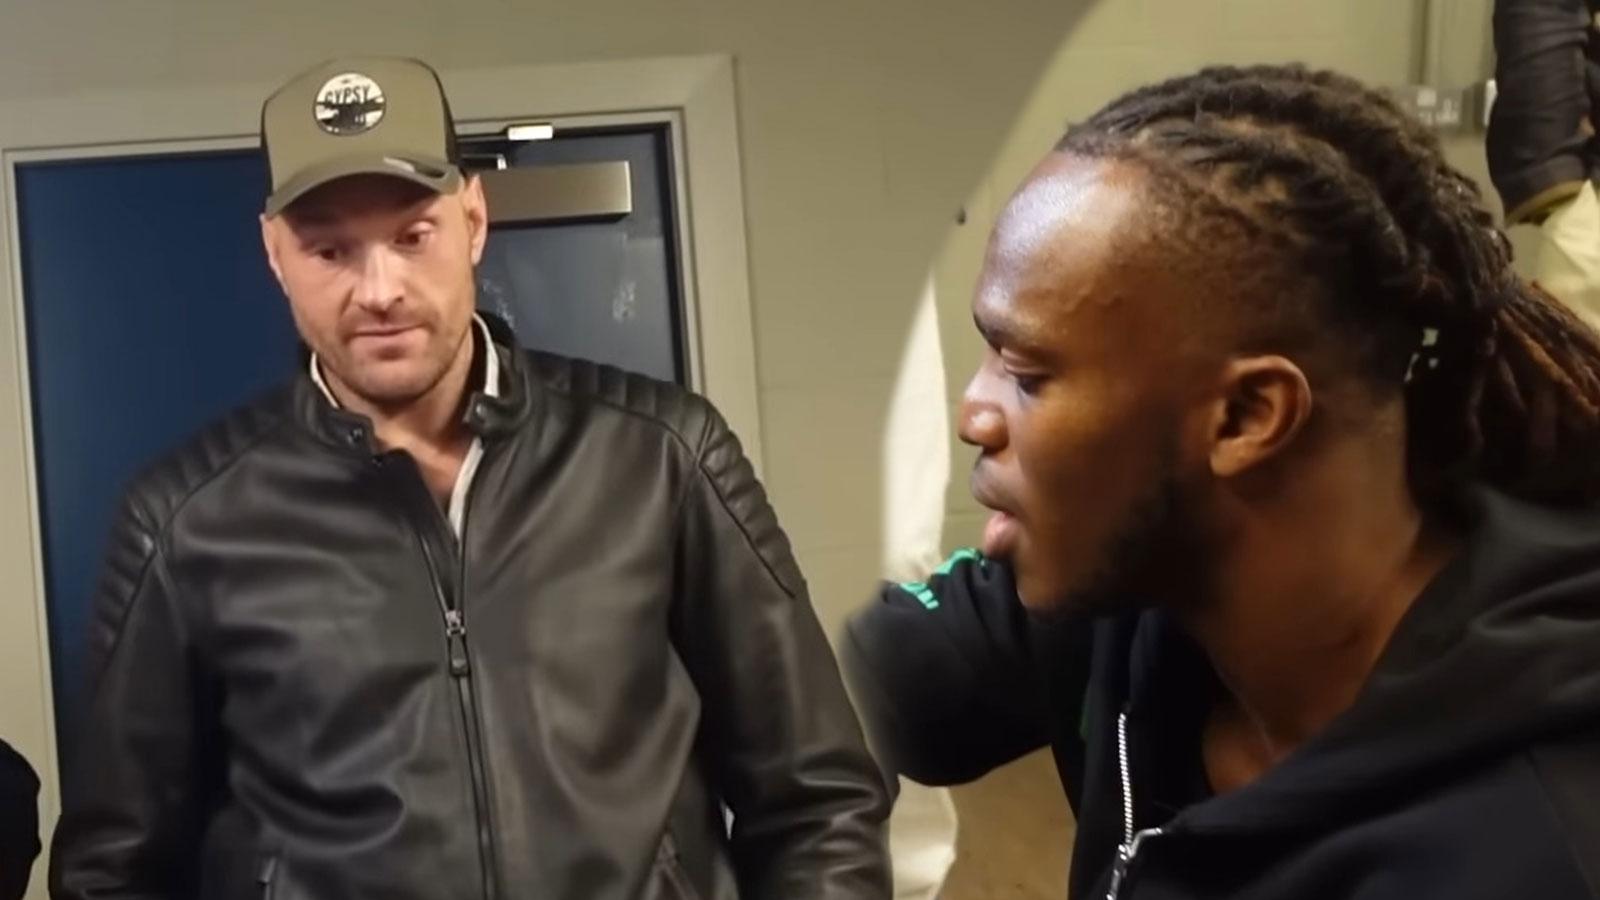 KSI sat getting his hands wrapped with Tyson Fury watching in the background